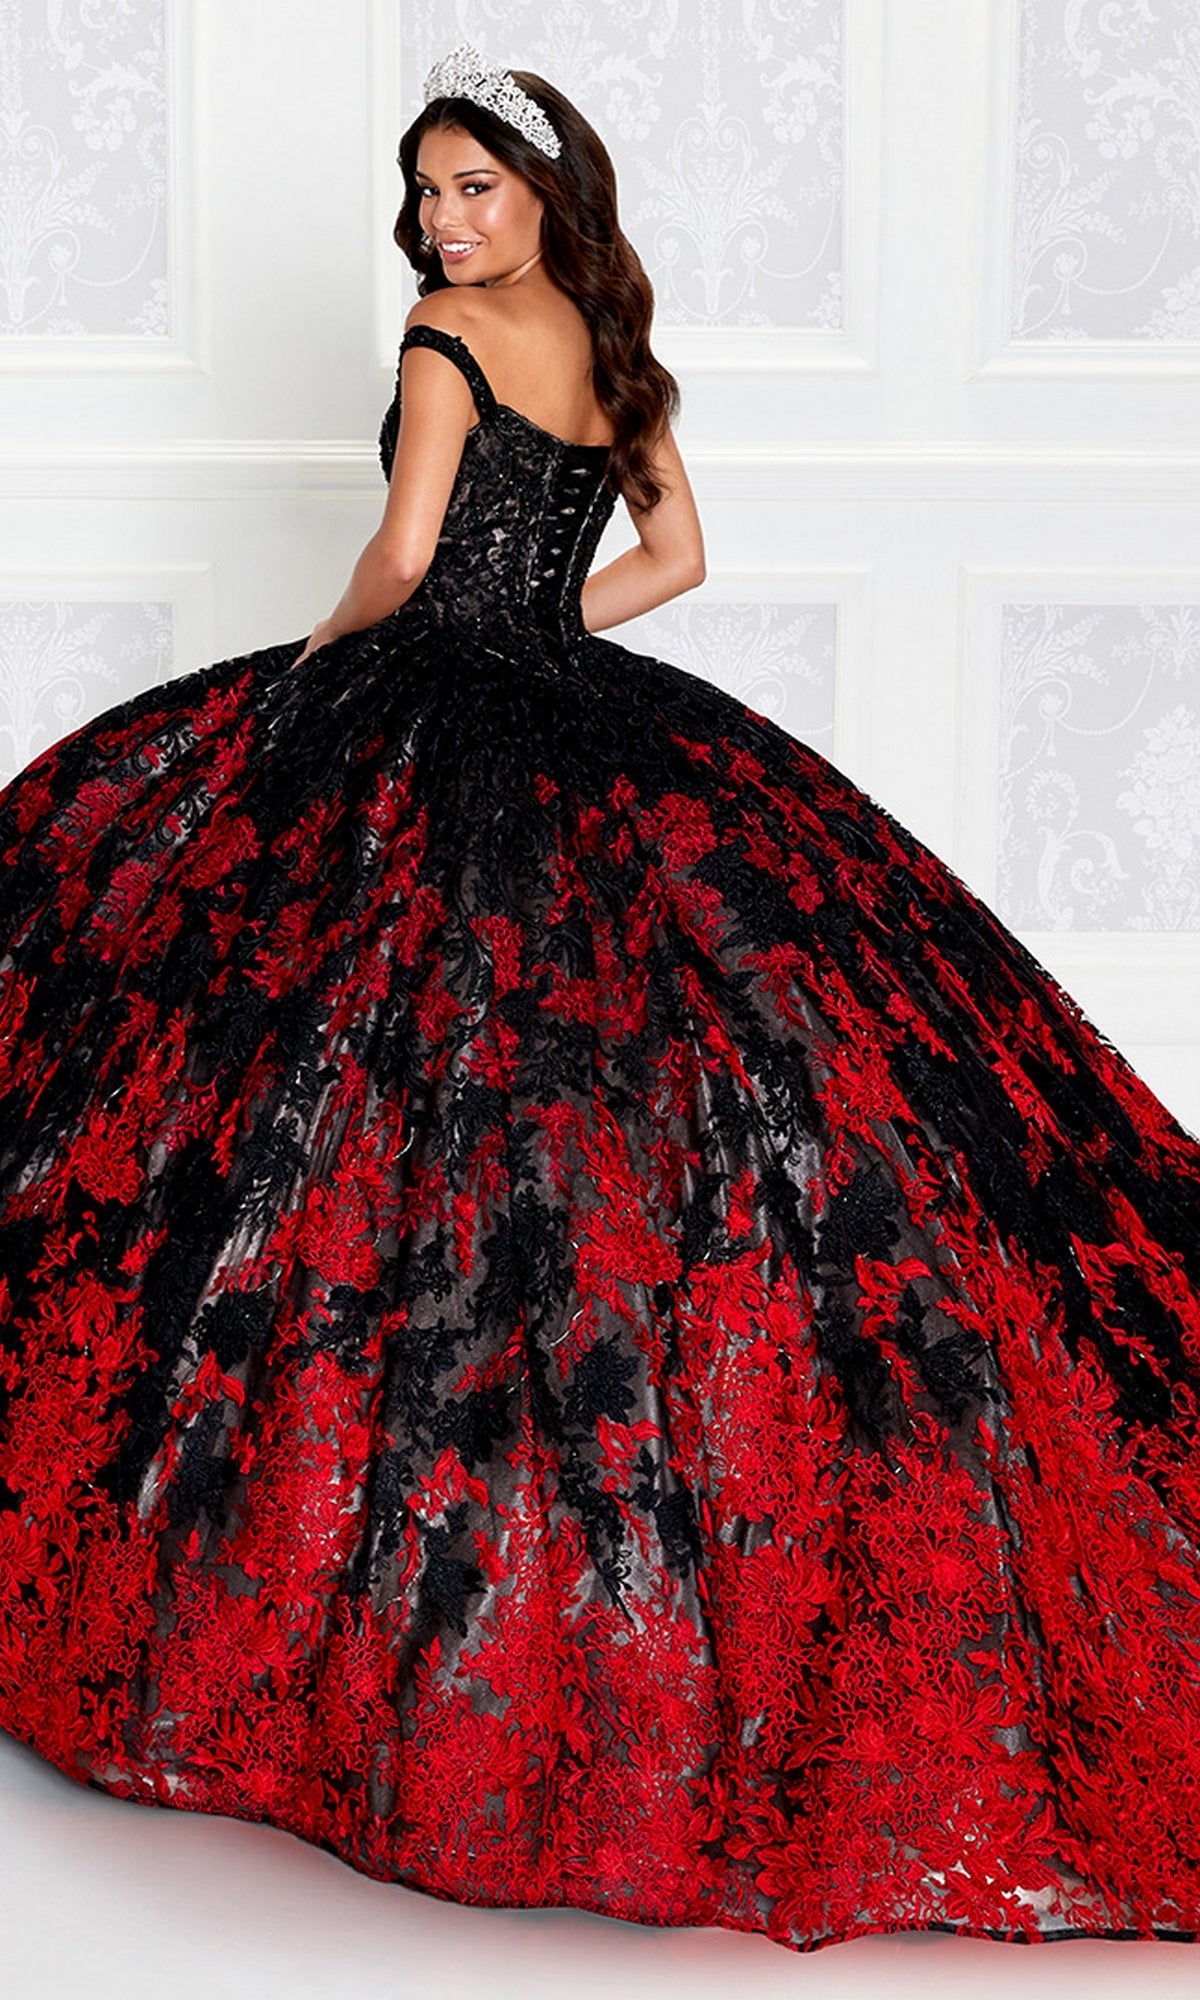 Buy THE DUBAI STUDIO Women's Red Tulle Full Sleeves Floral Embroidered Ball  Gown at Amazon.in